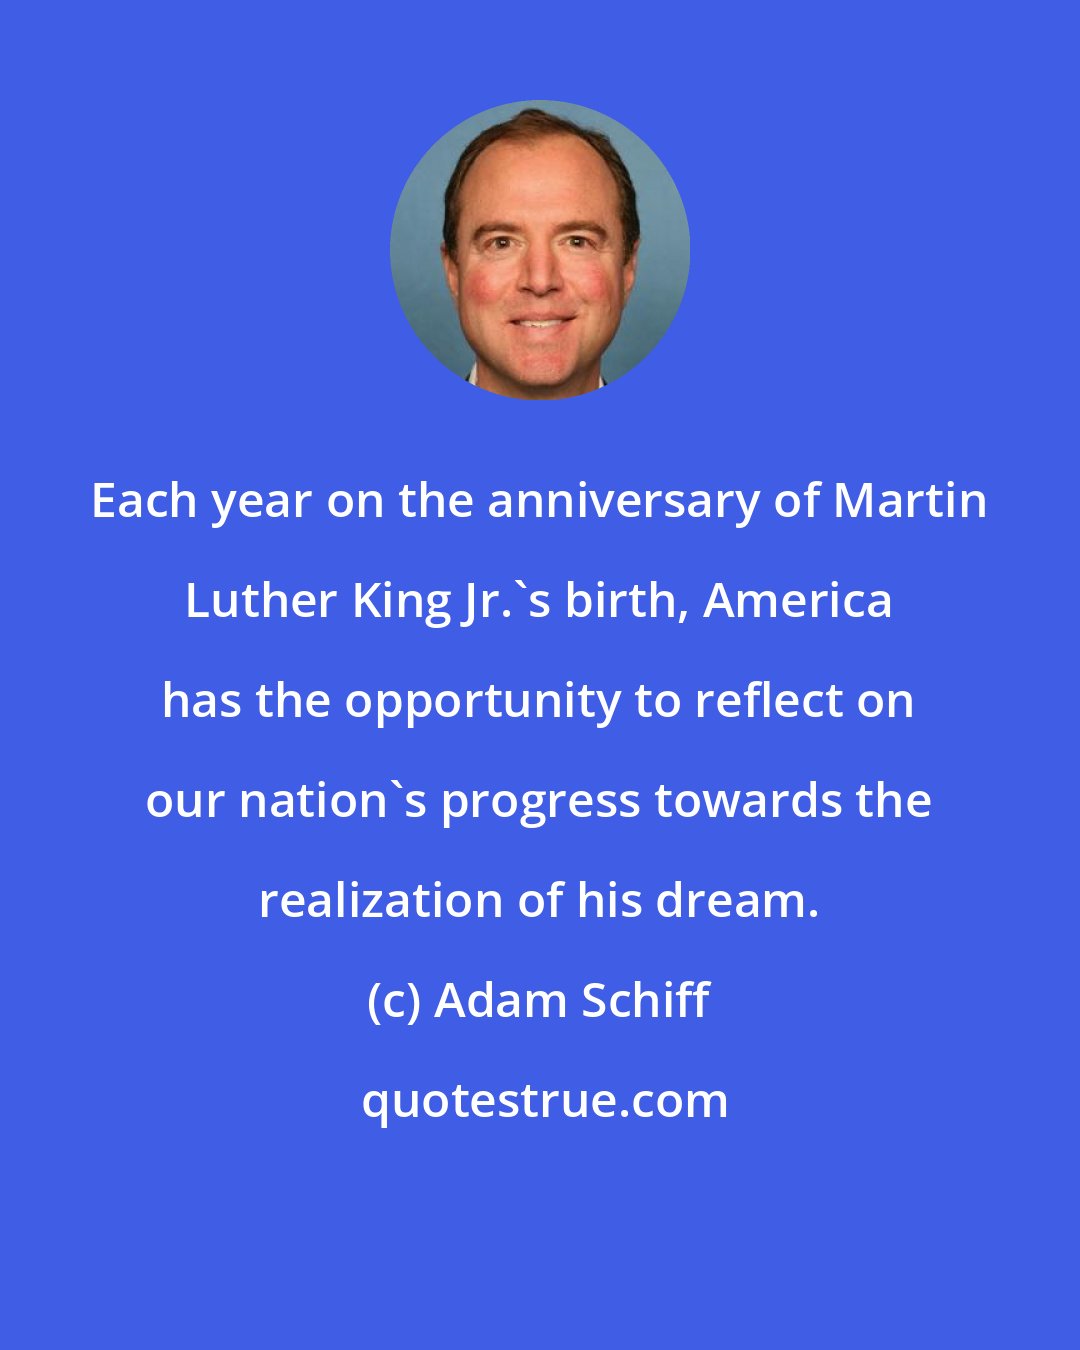 Adam Schiff: Each year on the anniversary of Martin Luther King Jr.'s birth, America has the opportunity to reflect on our nation's progress towards the realization of his dream.